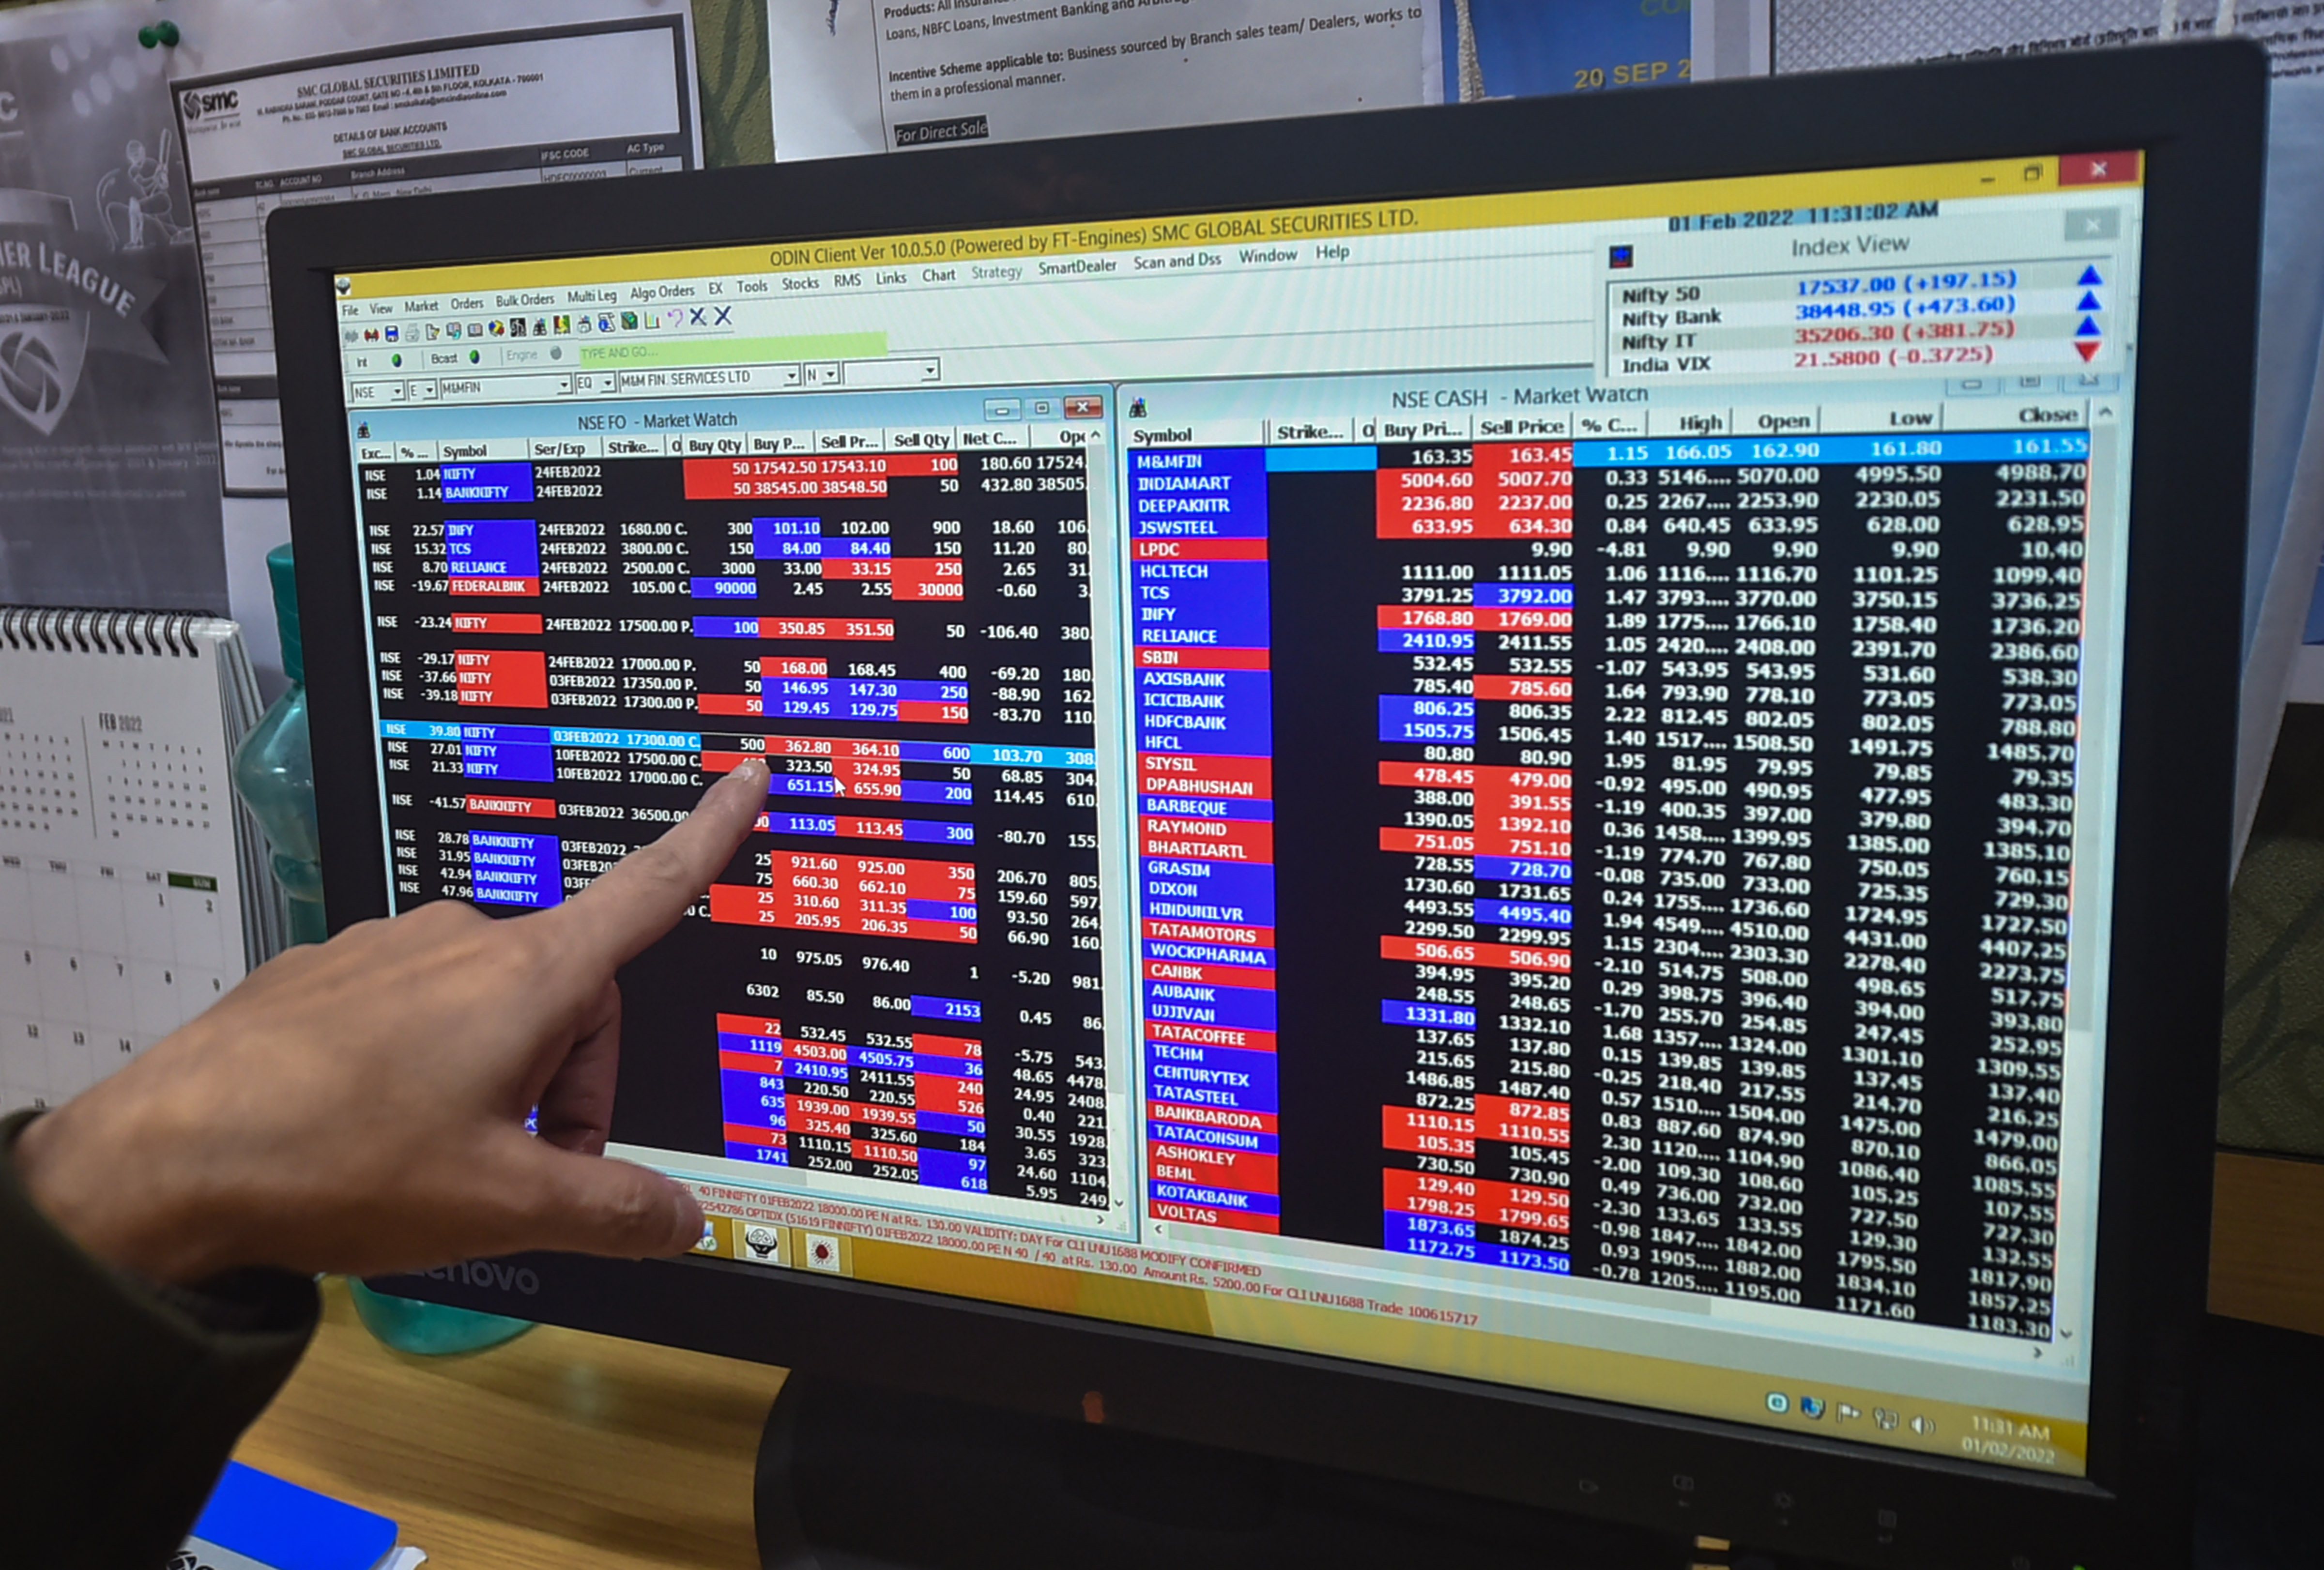 Domestic traders to be worst hit by falling stock market